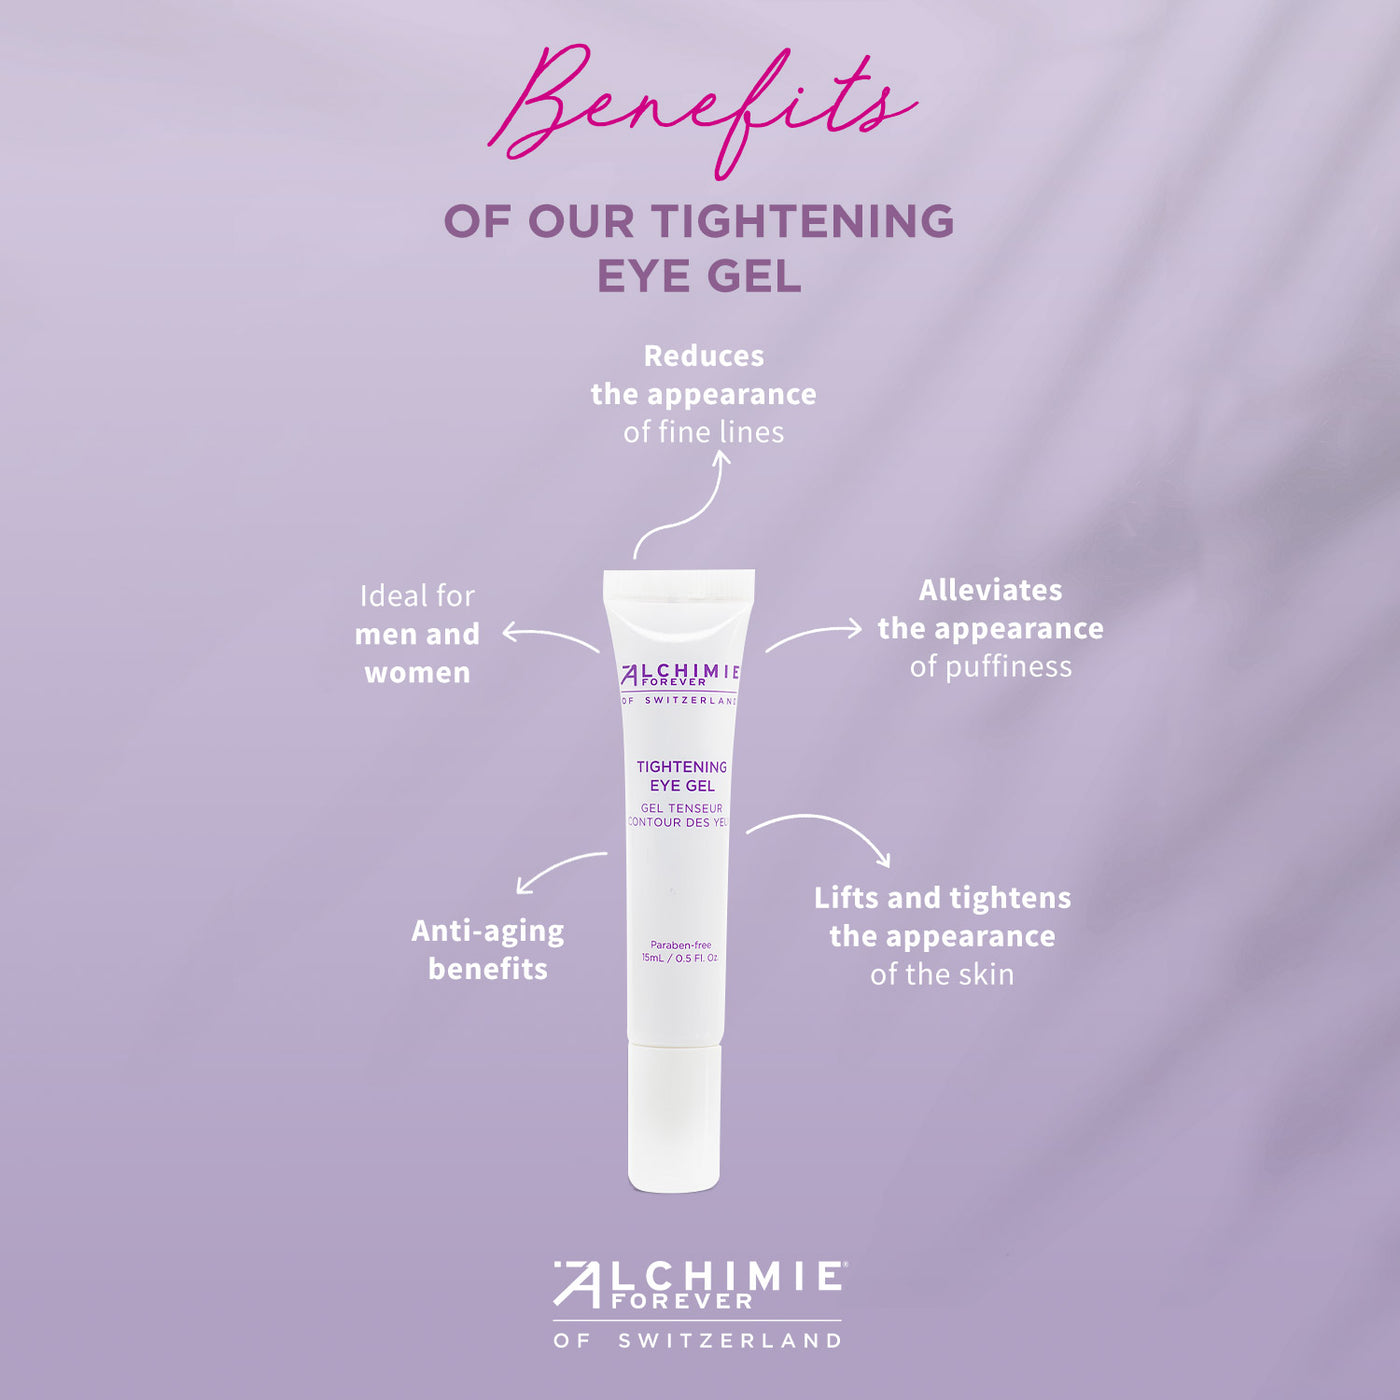 Tightening Eye Gel Benefits.  Tightens, lifts and firms the skin.  Pregnancy safe.